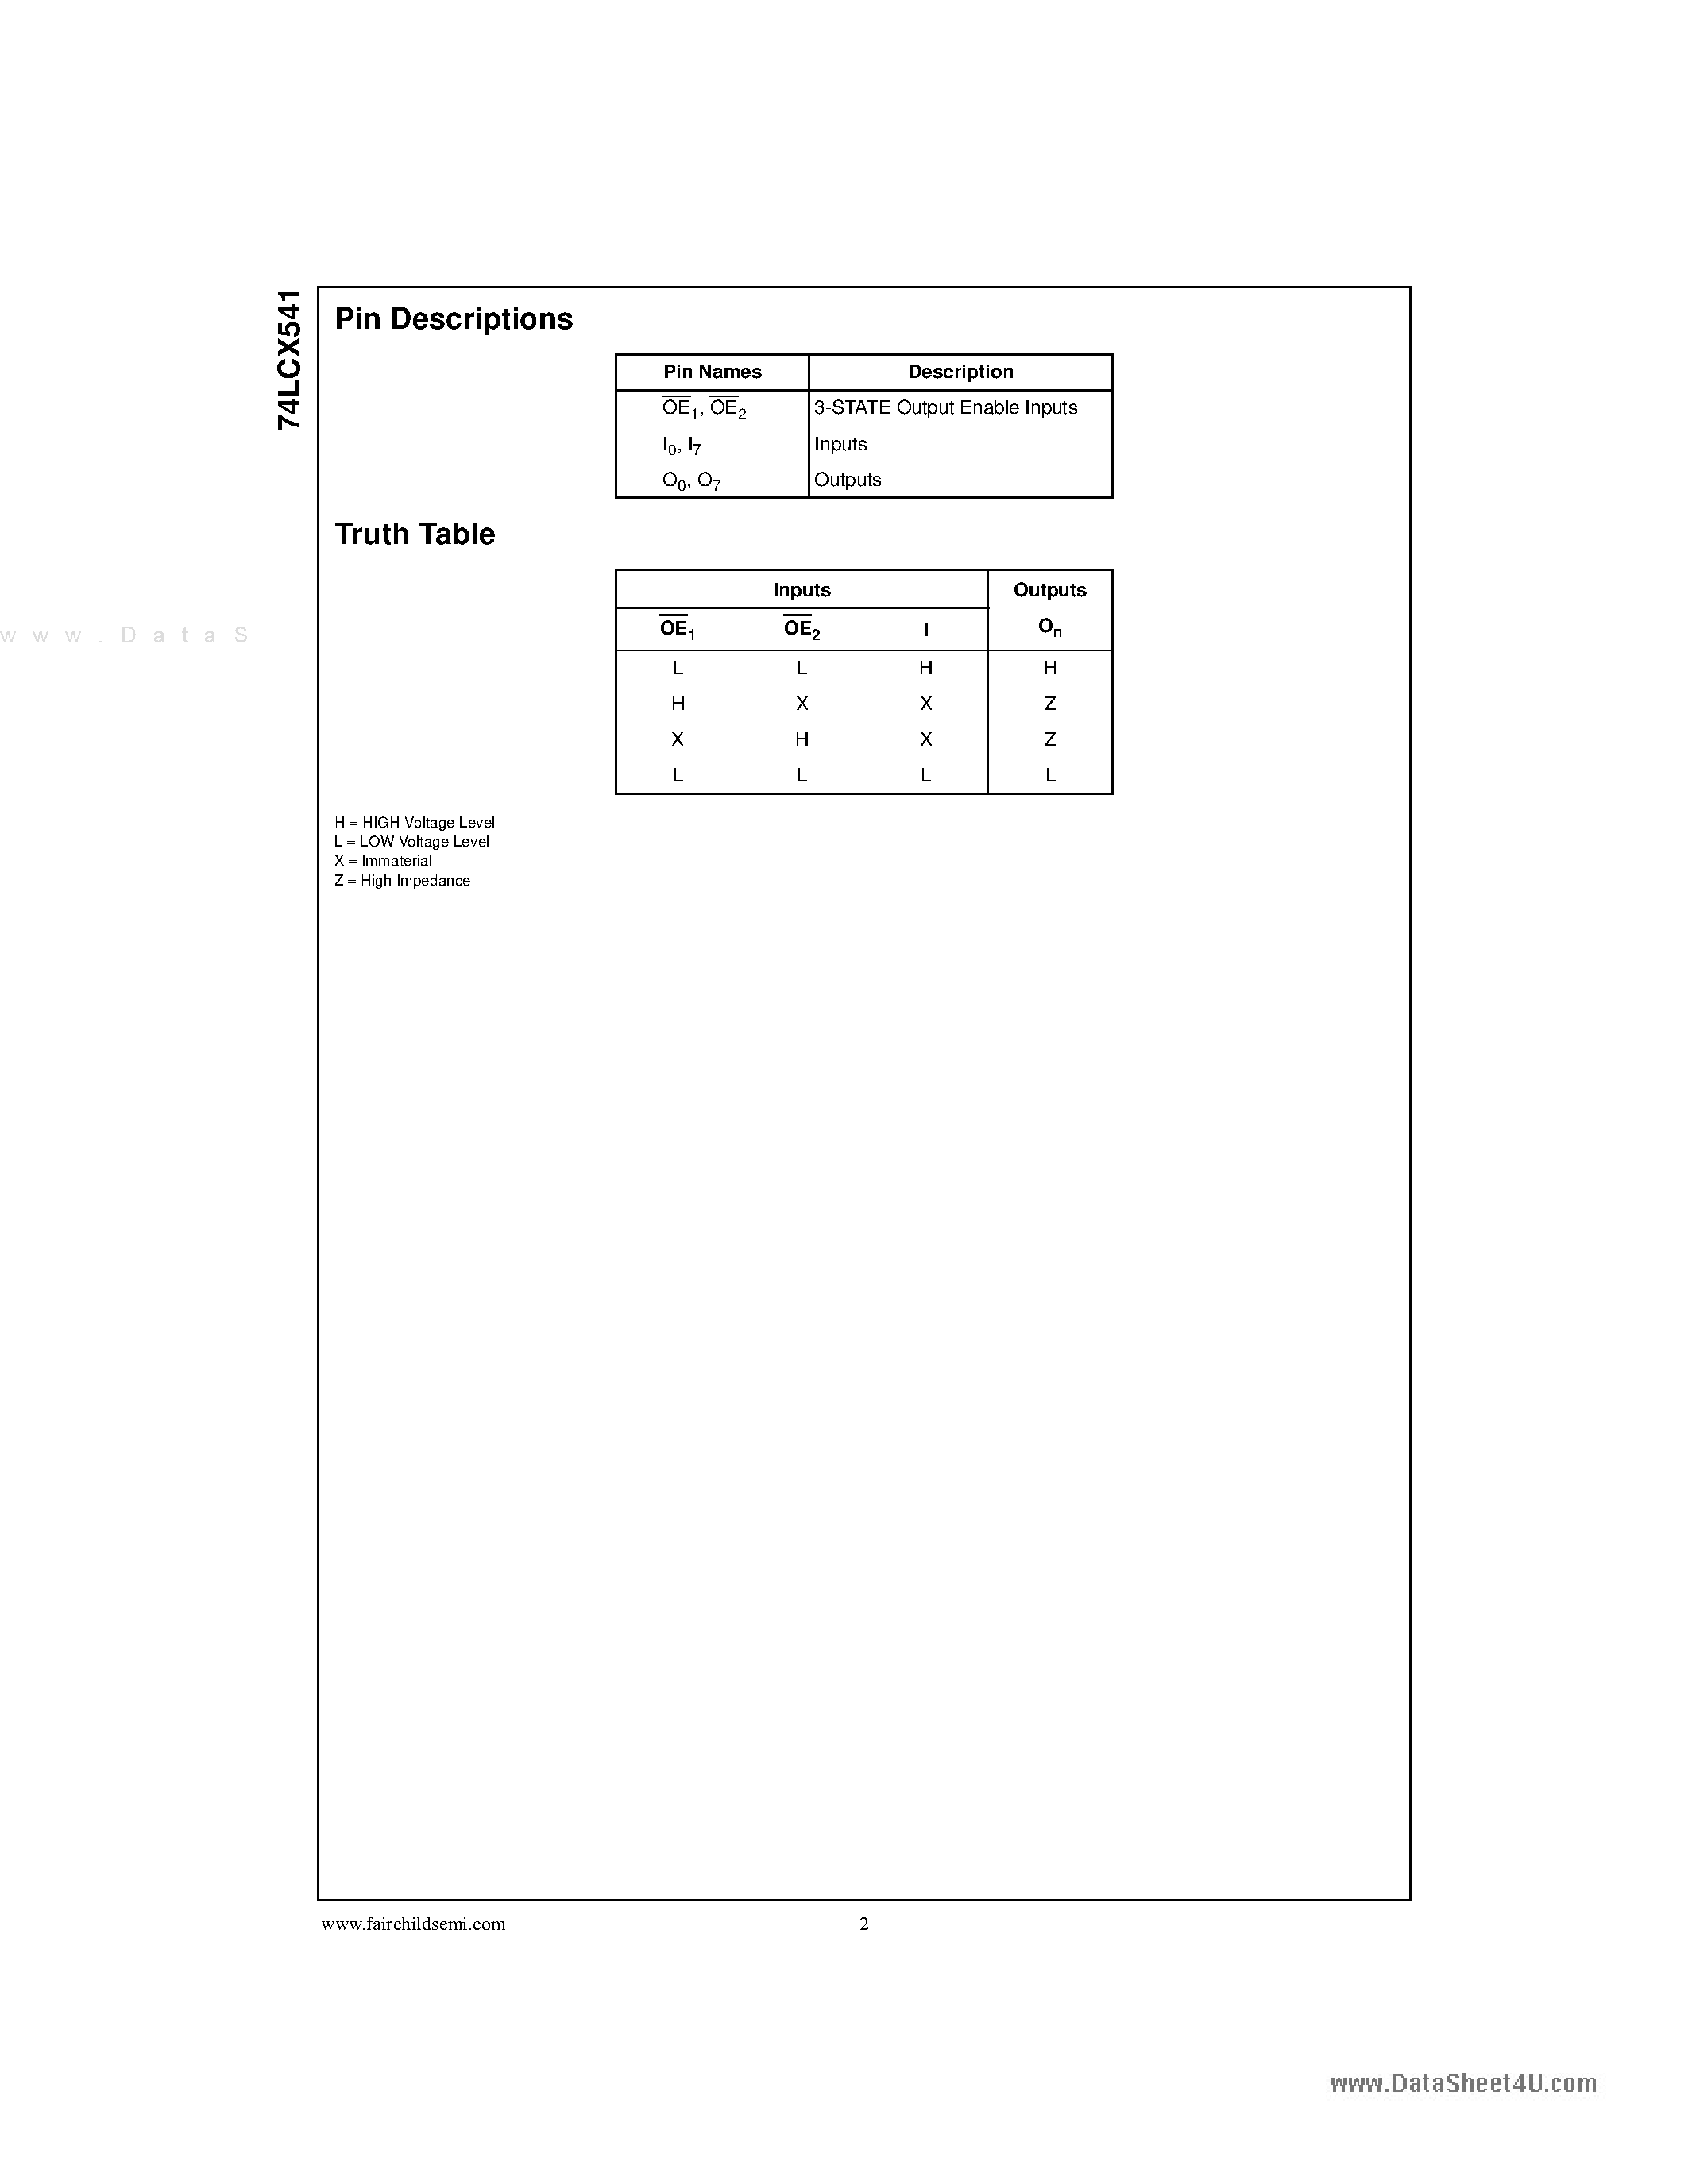 Datasheet LCX541 - Search -----> 74LCX541 page 2